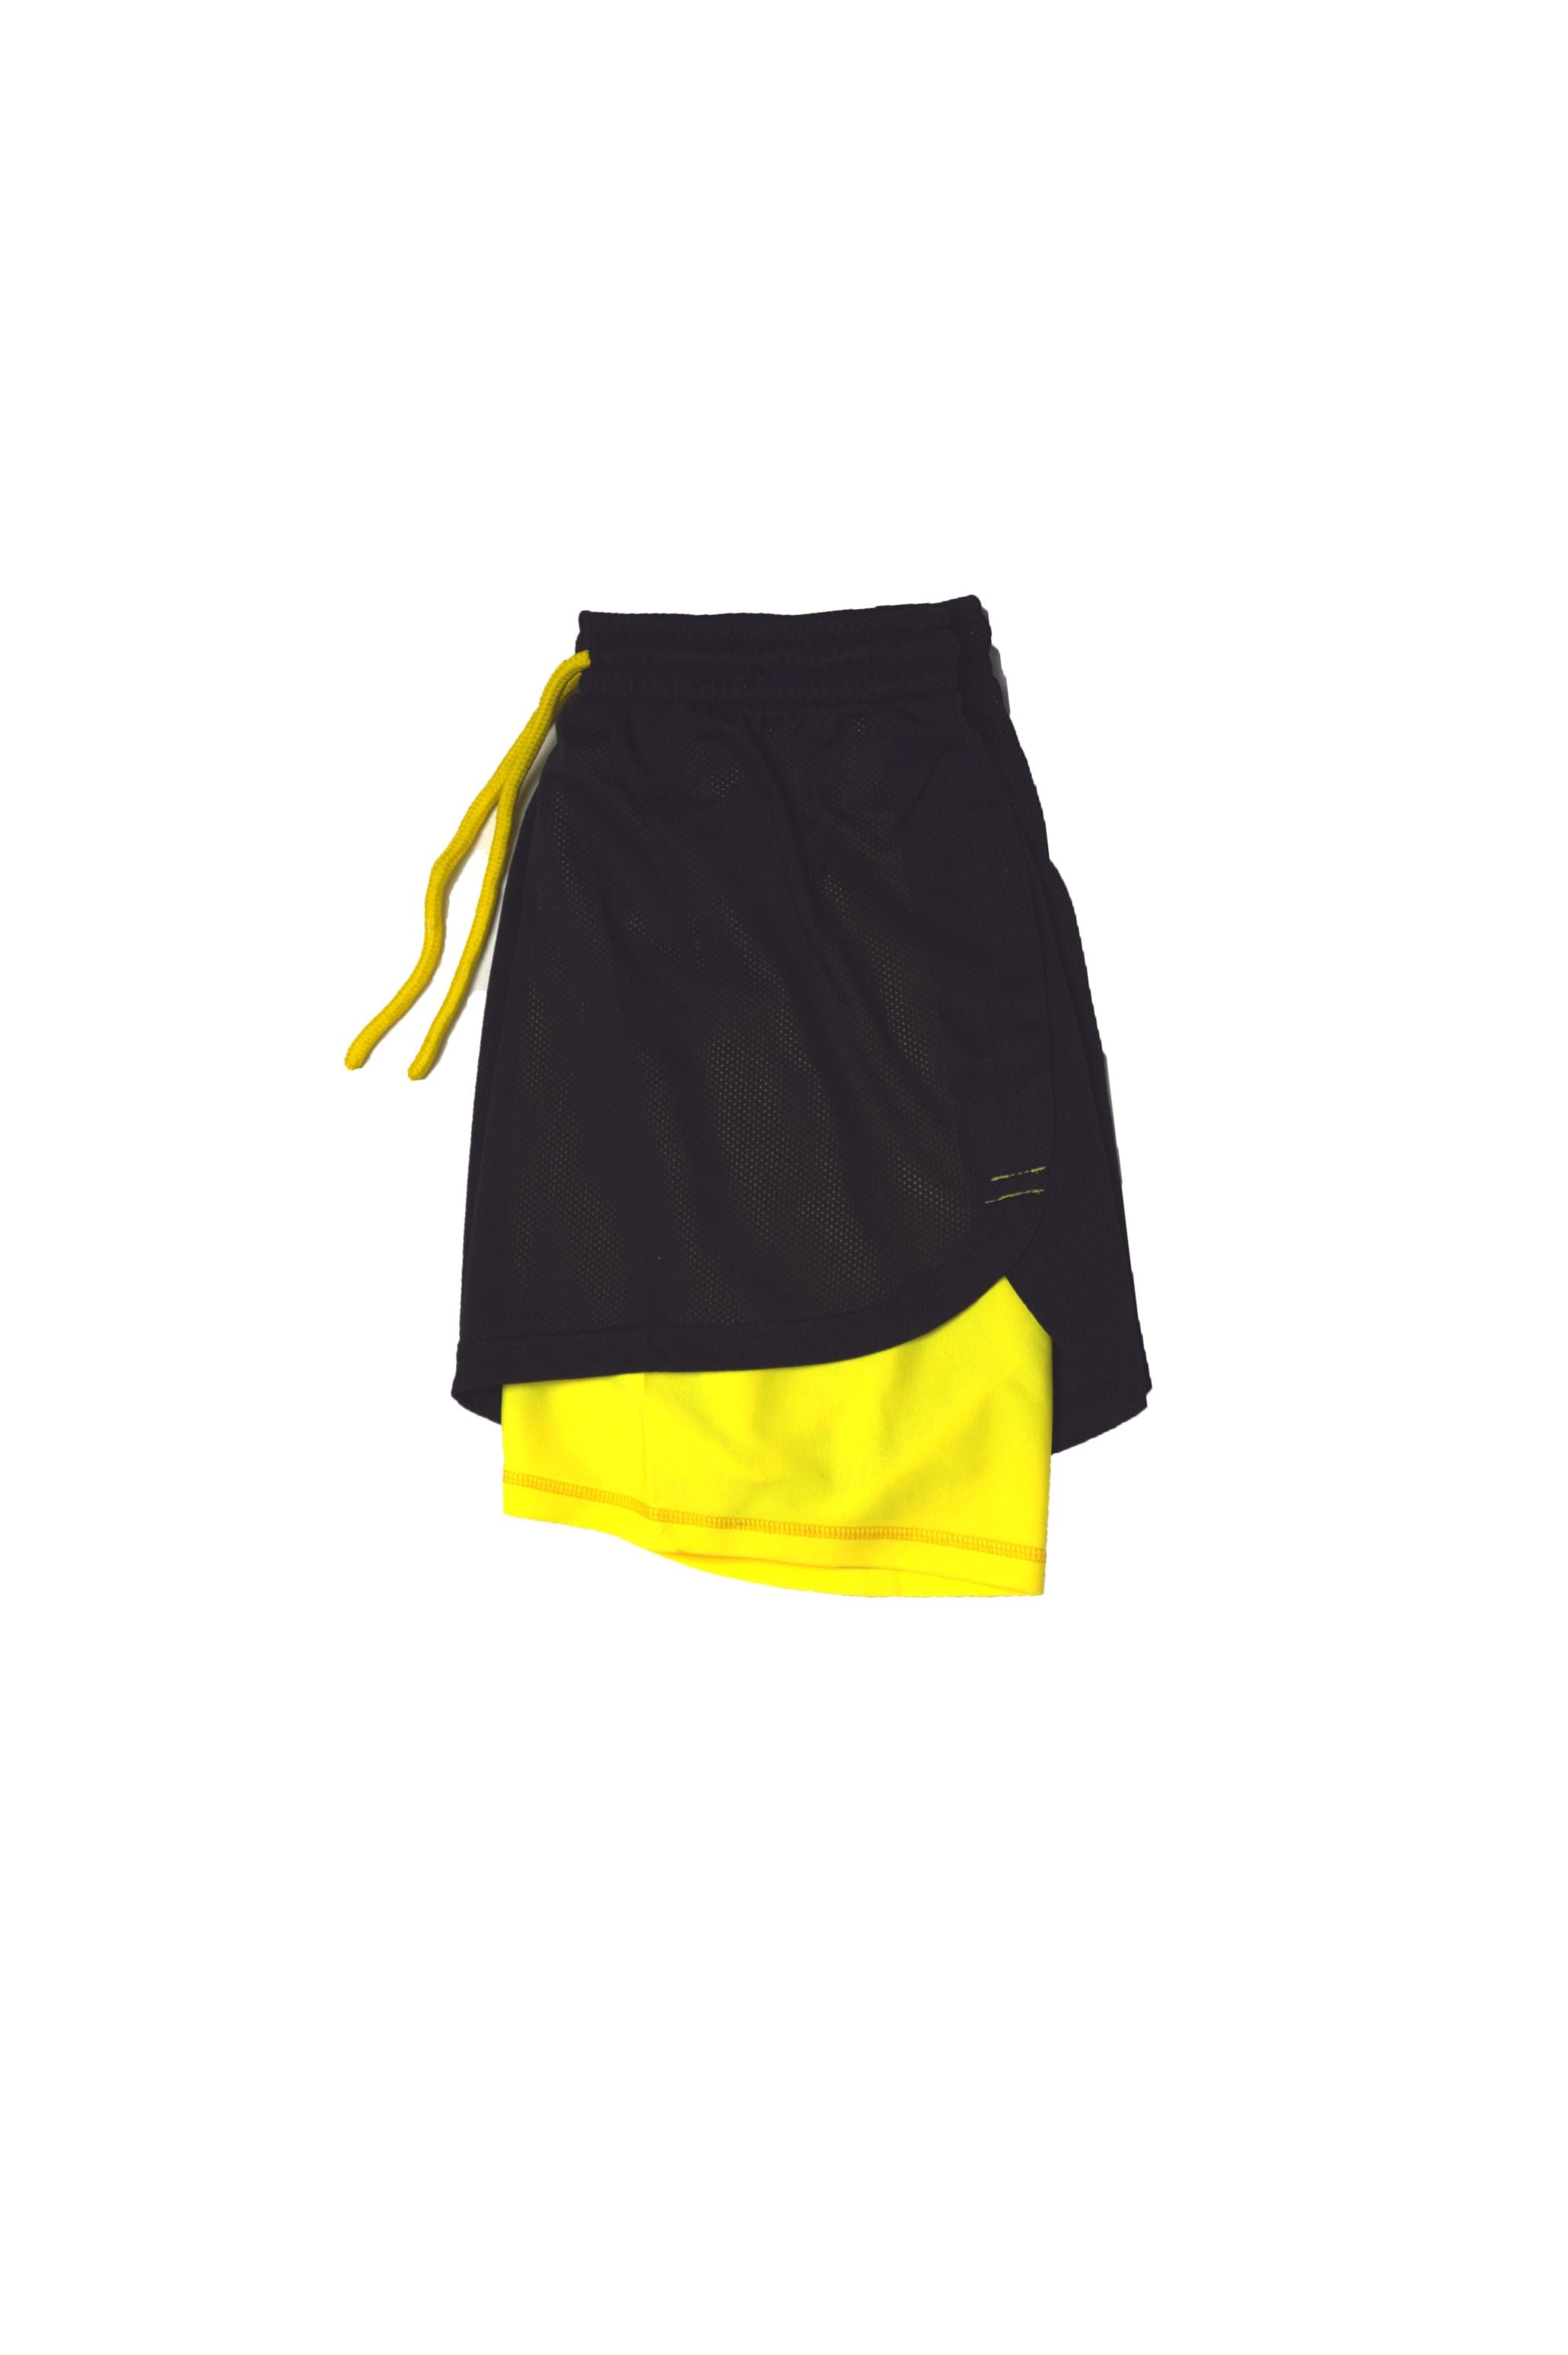 WOMEN FITNESS SHORTS BLACK AND YELLOW COLOUR